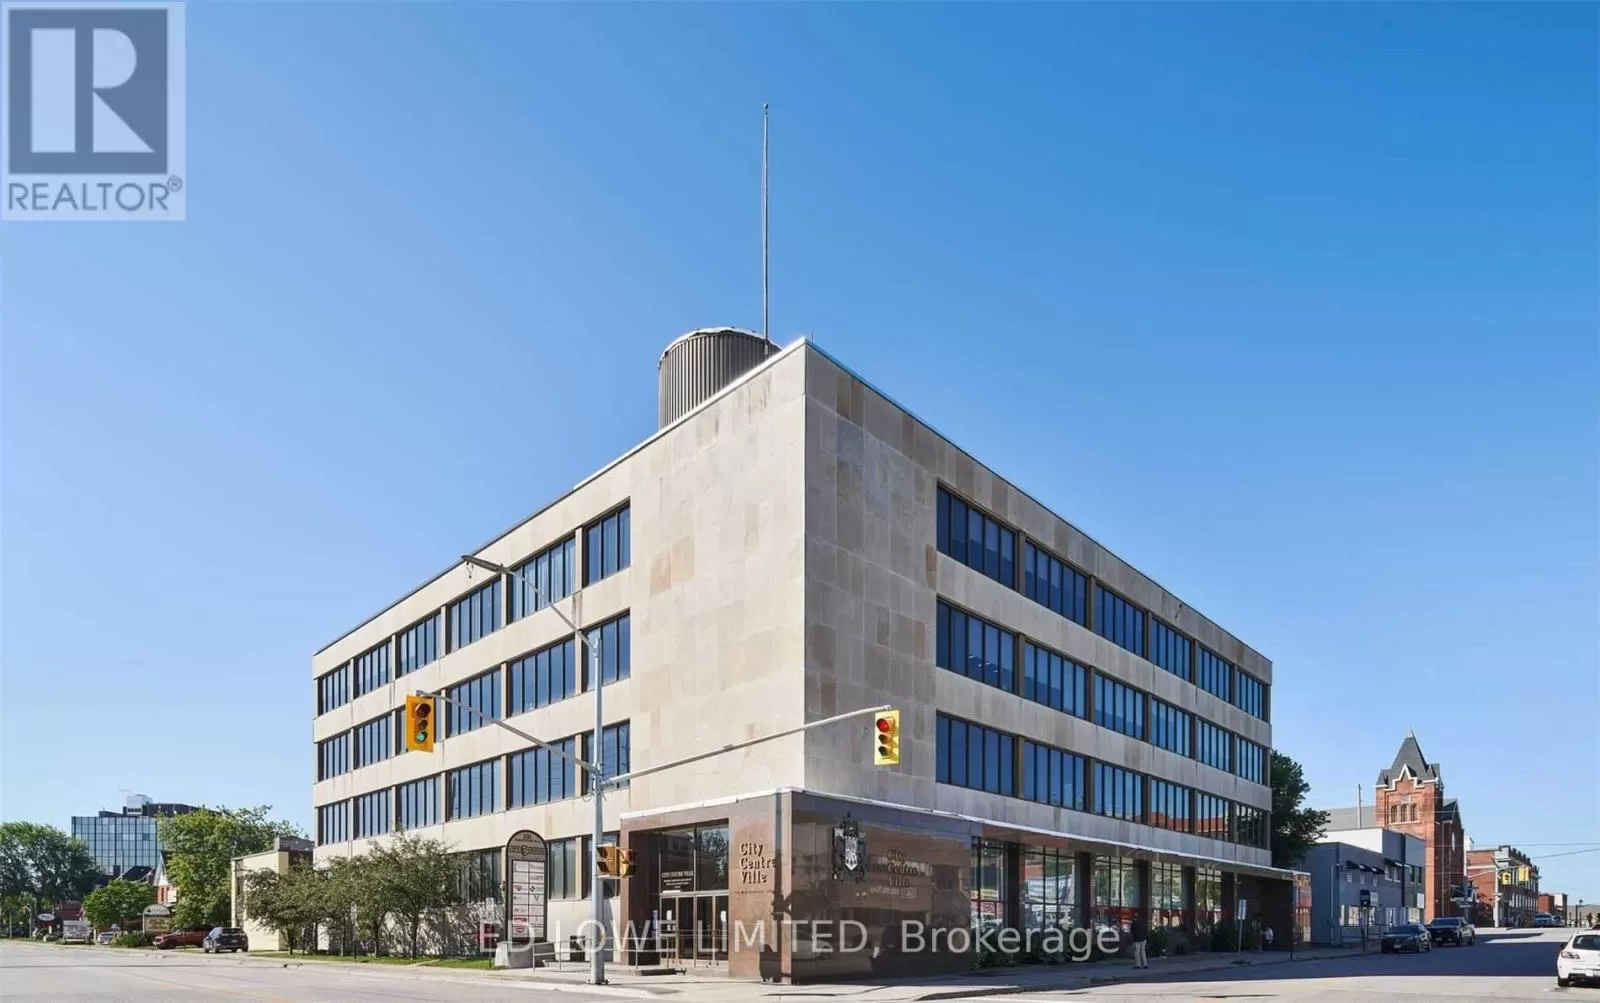 Offices for rent: #204 -101 Worthington St E, North Bay, Ontario P1B 1G5